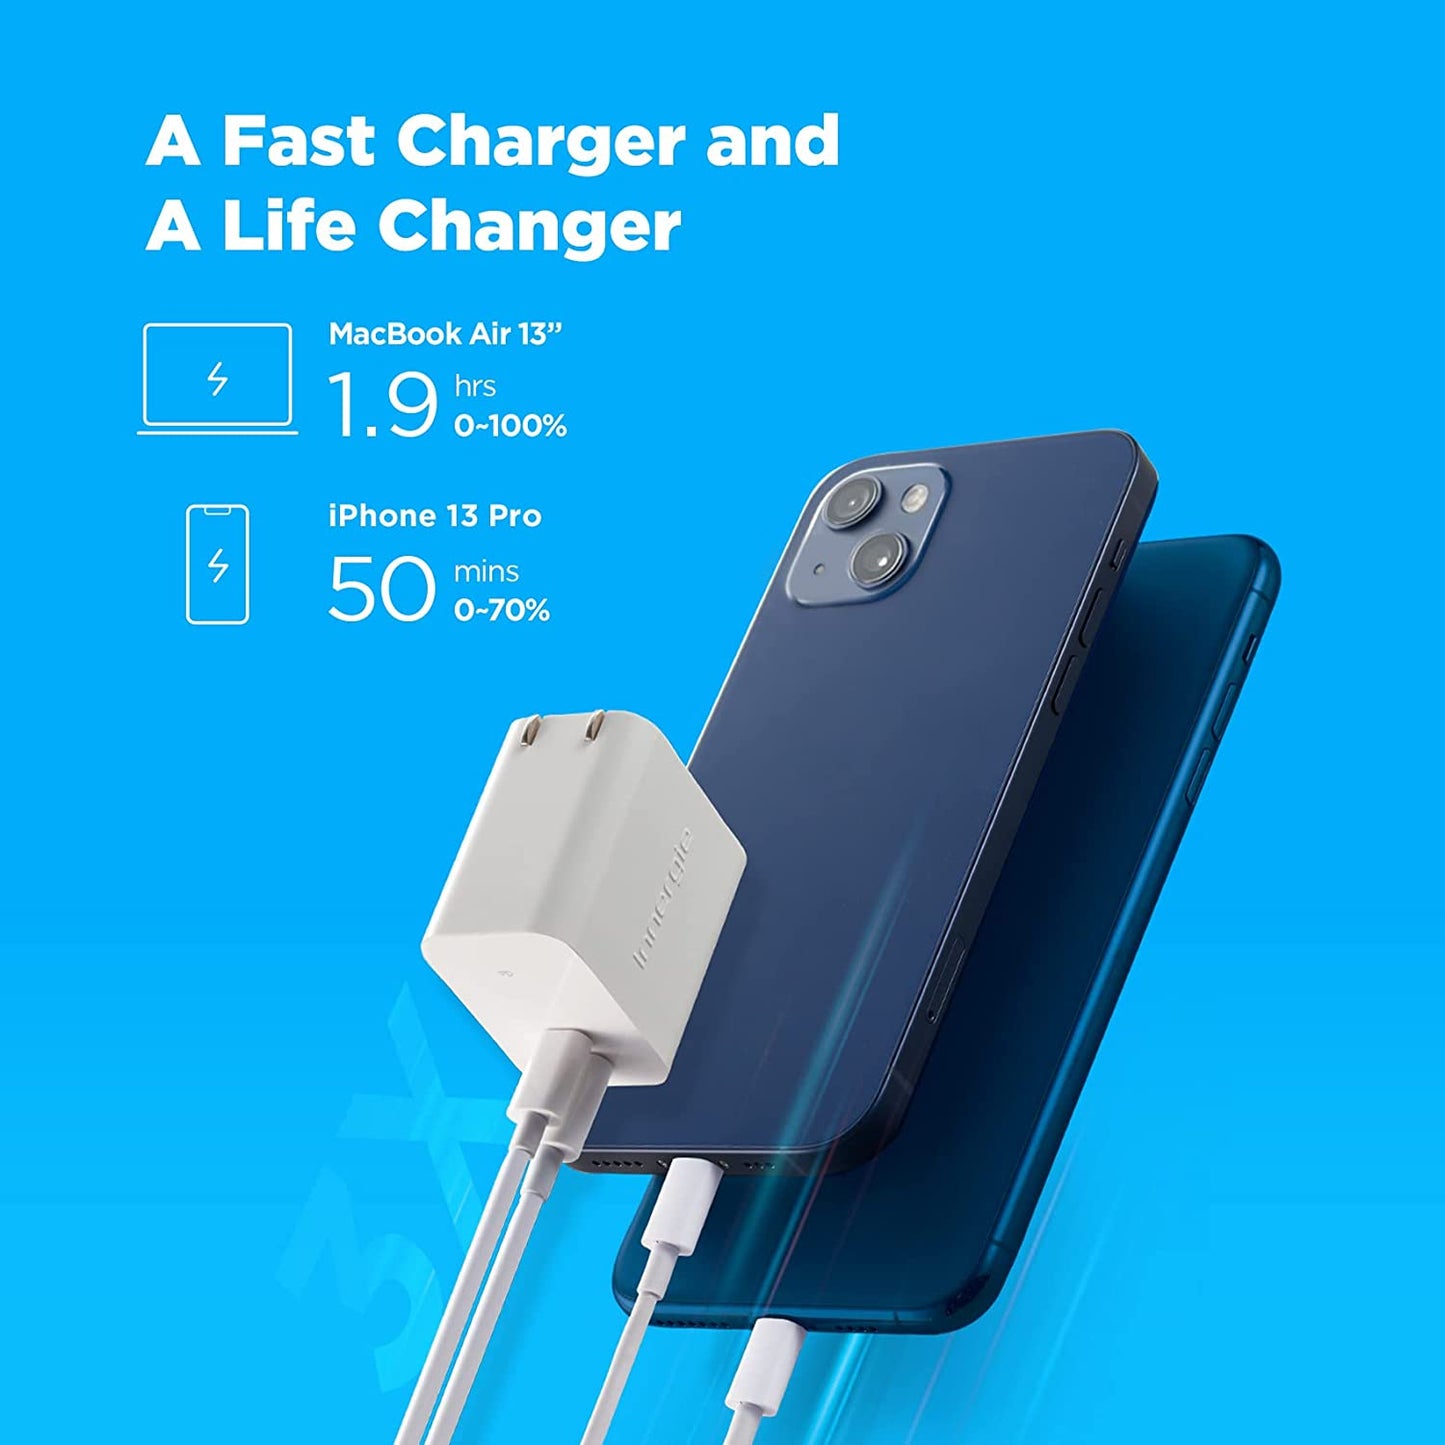 Innergie C3-Duo One for All USB-C Wall Charger 30W